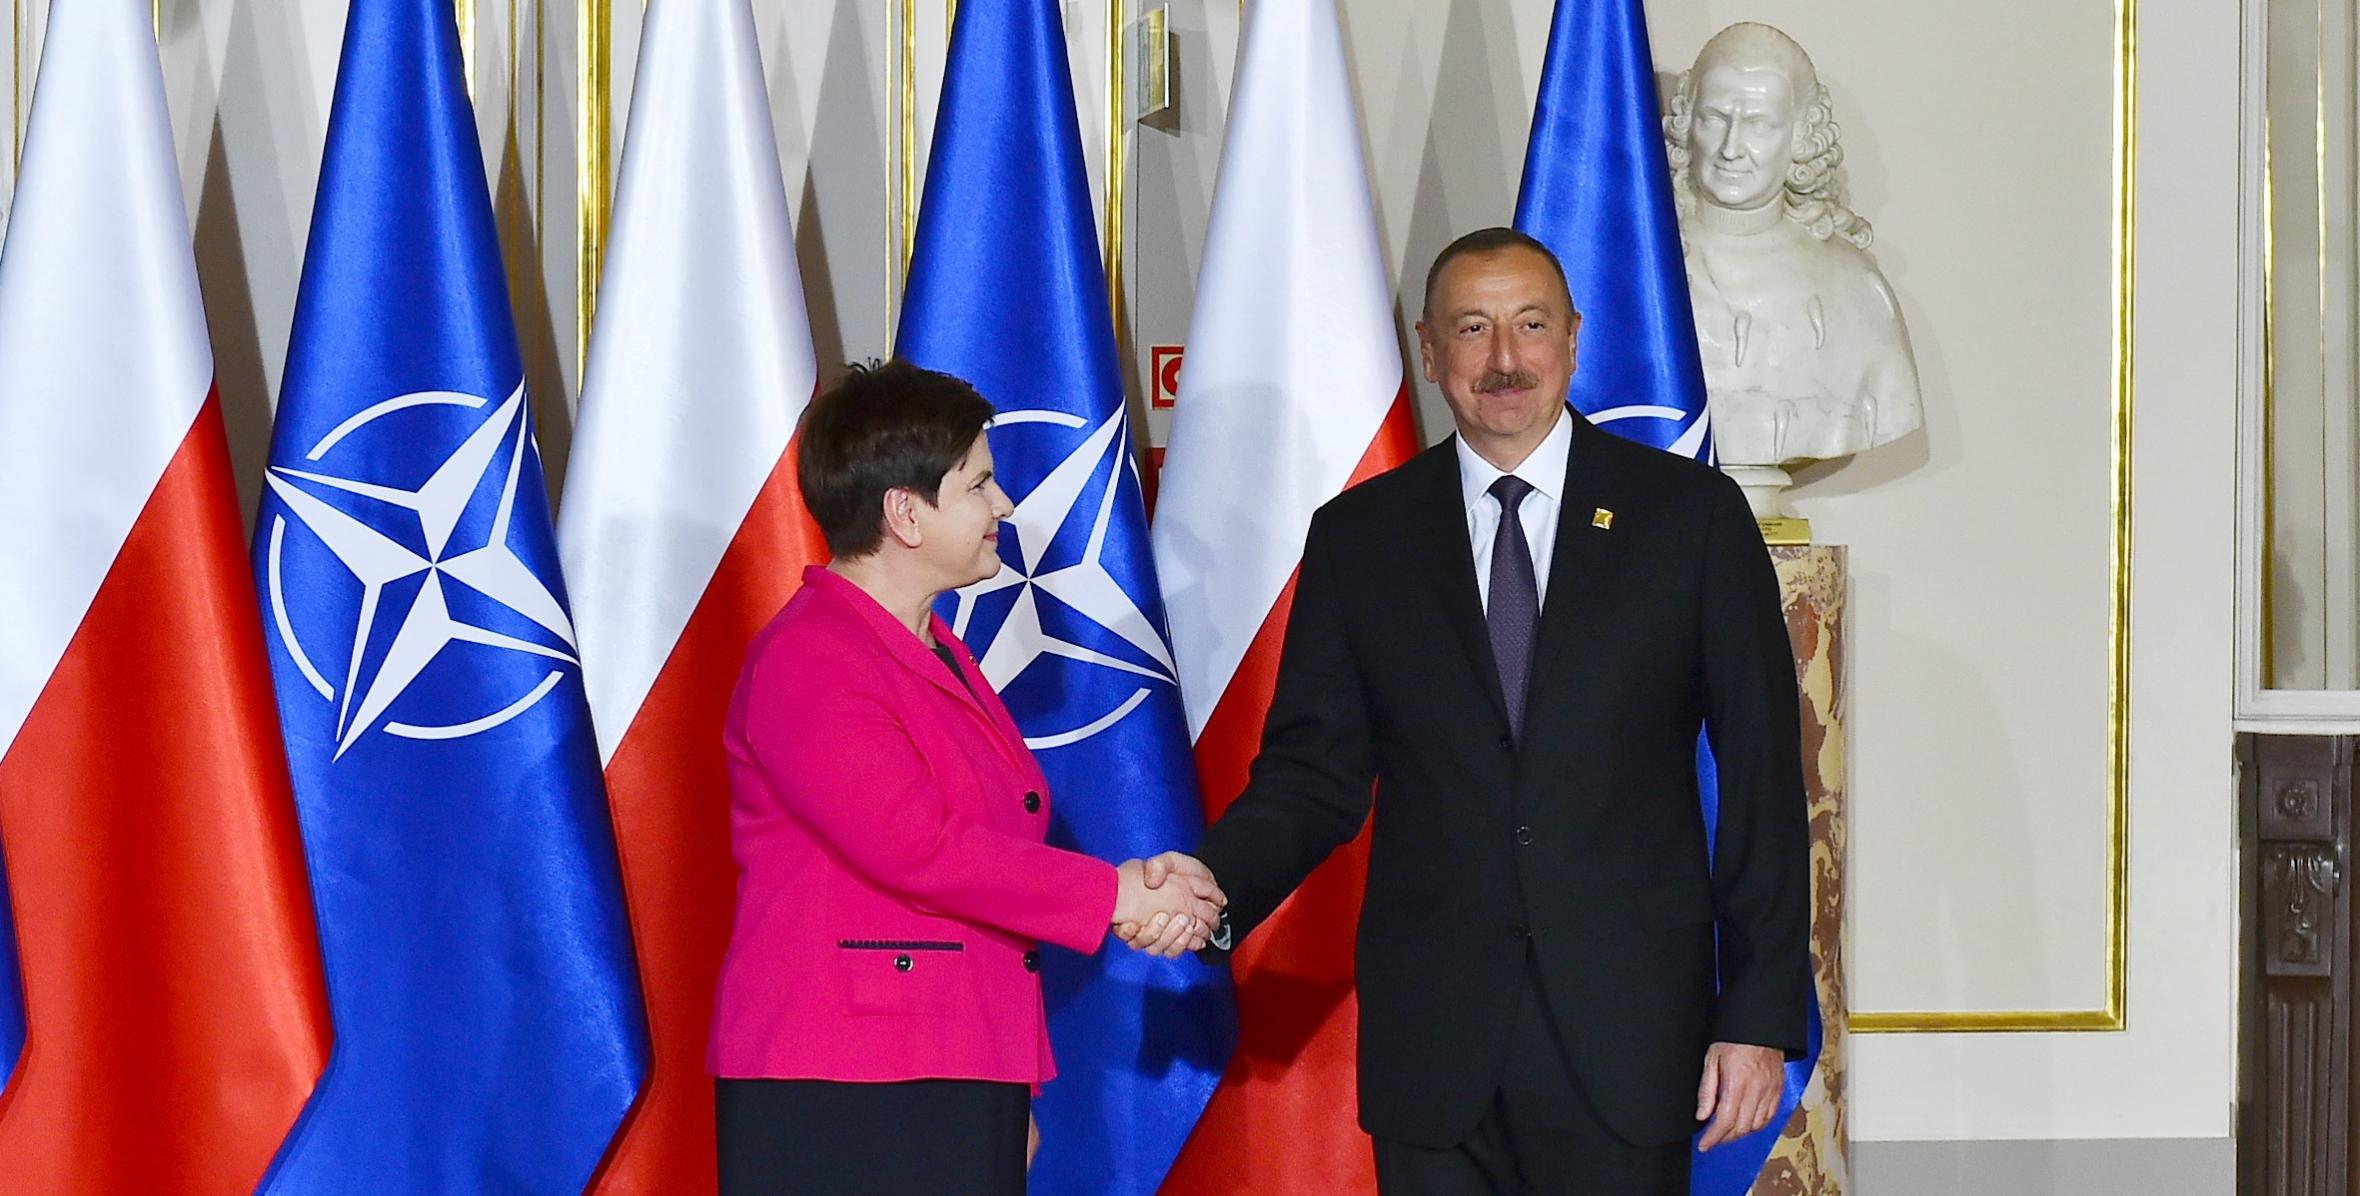 Ilham Aliyev attended a reception for NATO Summit participants